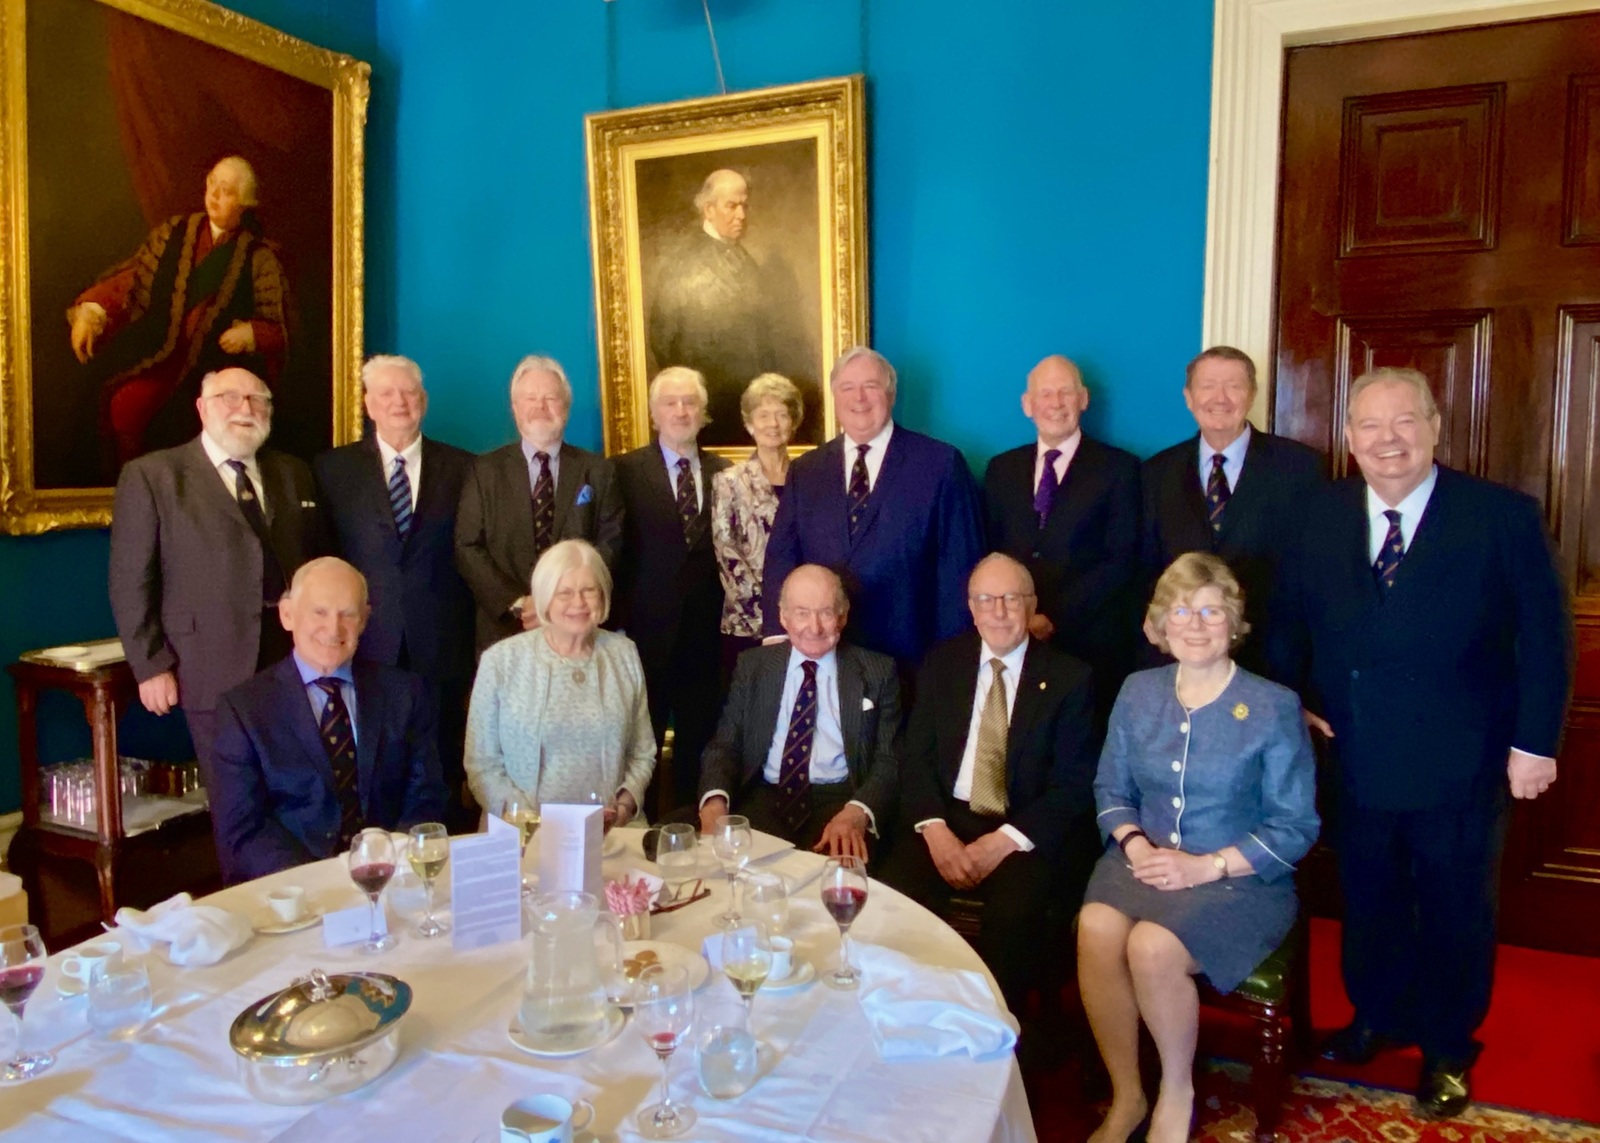 Privileged to host a convivial Past Master’s Lunch to John Hammond marking his retirement after 8 years as Learned Clerk to the WC of Marketors